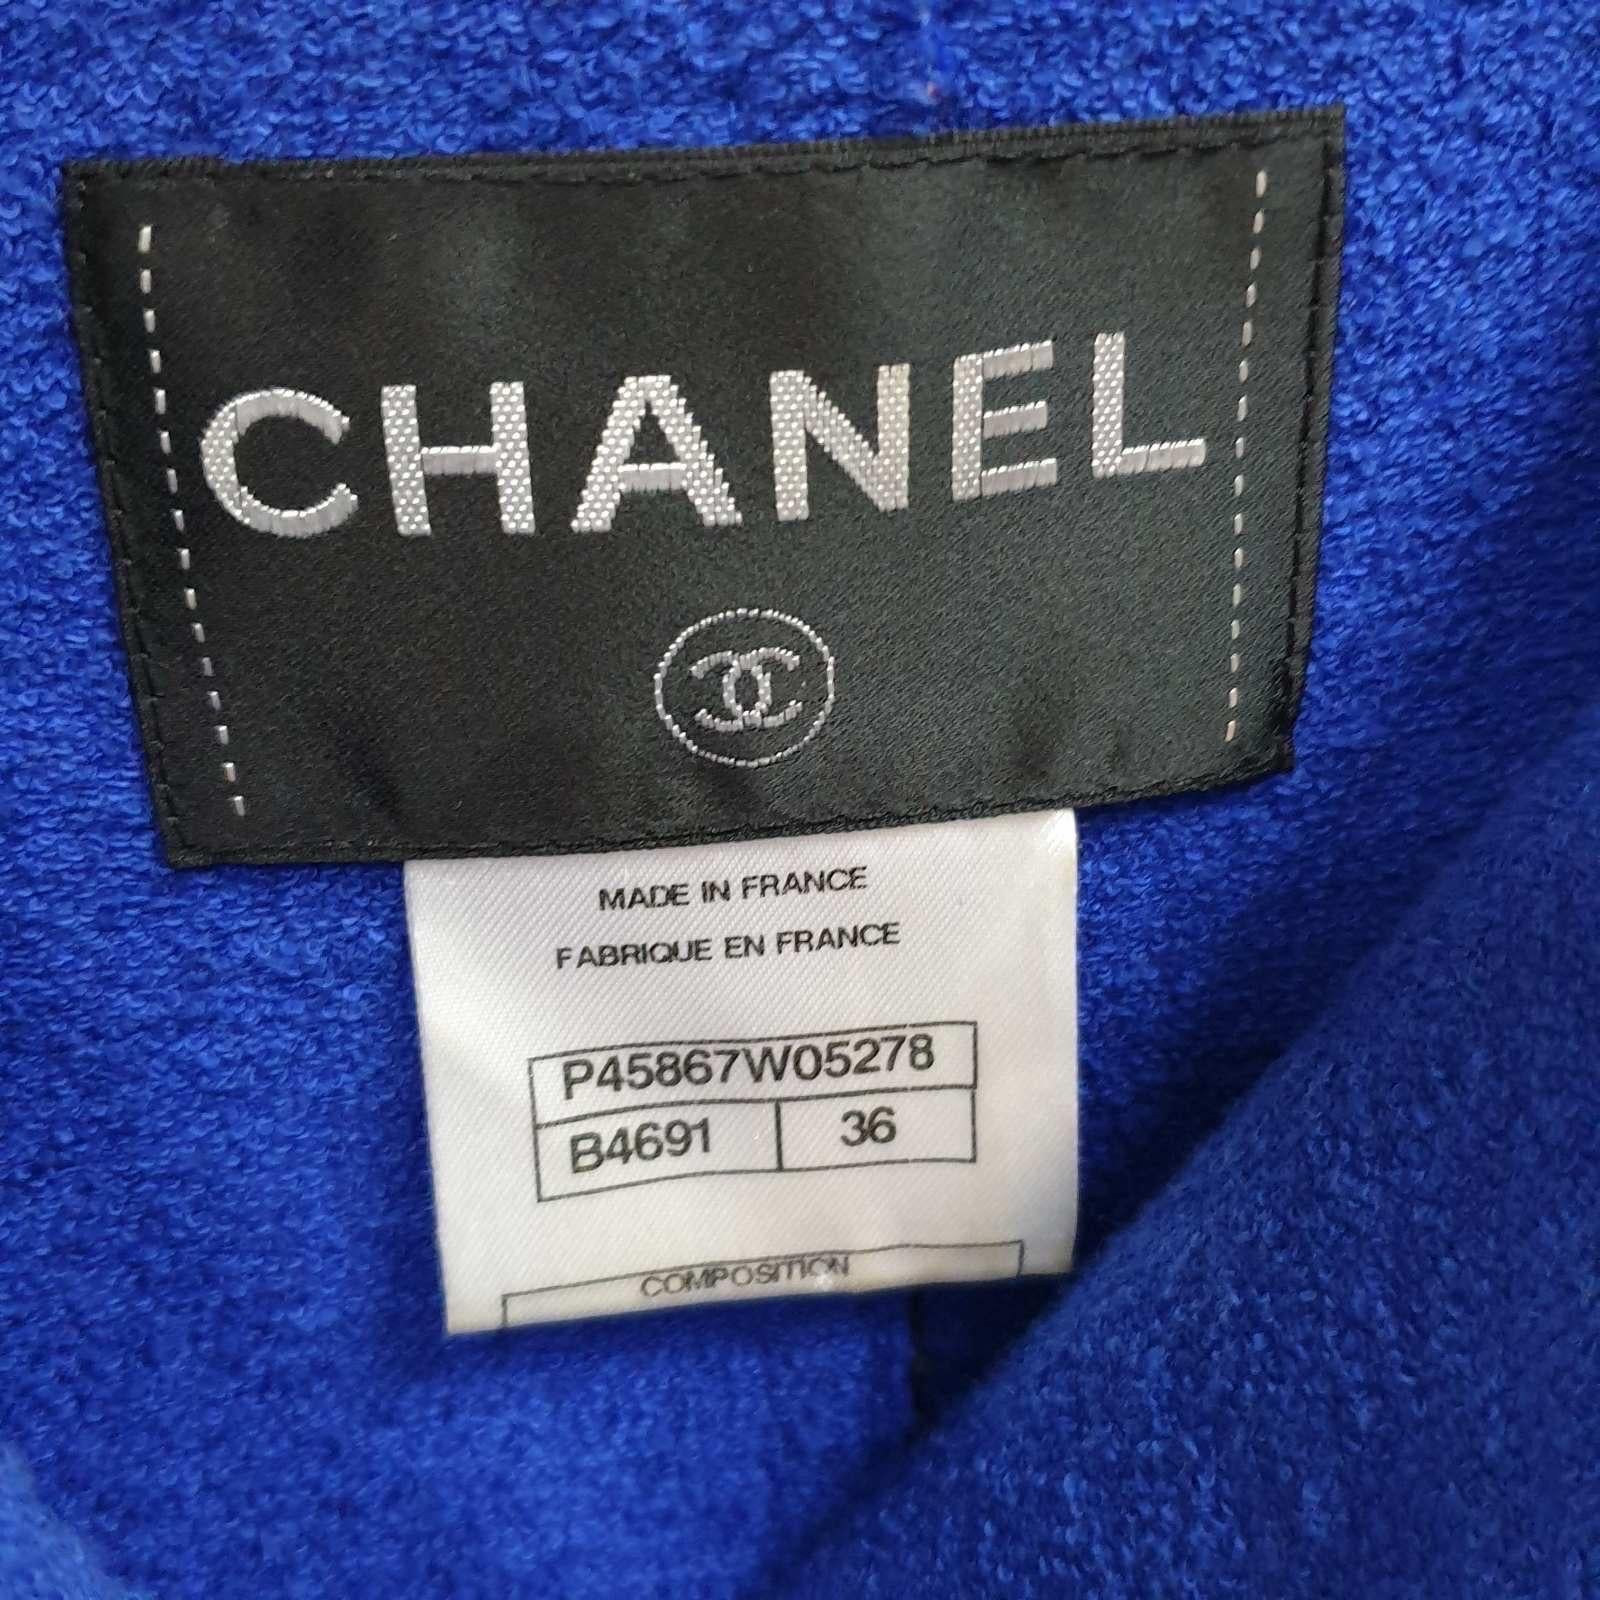 Stunning Chanel jacket in thick, form-holding reversible tweed. The front part of the jacket is made of bright blue, dark blue and pink threads. The reverse side, which acts as a lining, is plain bright blue. Straight silhouette, patch pockets on